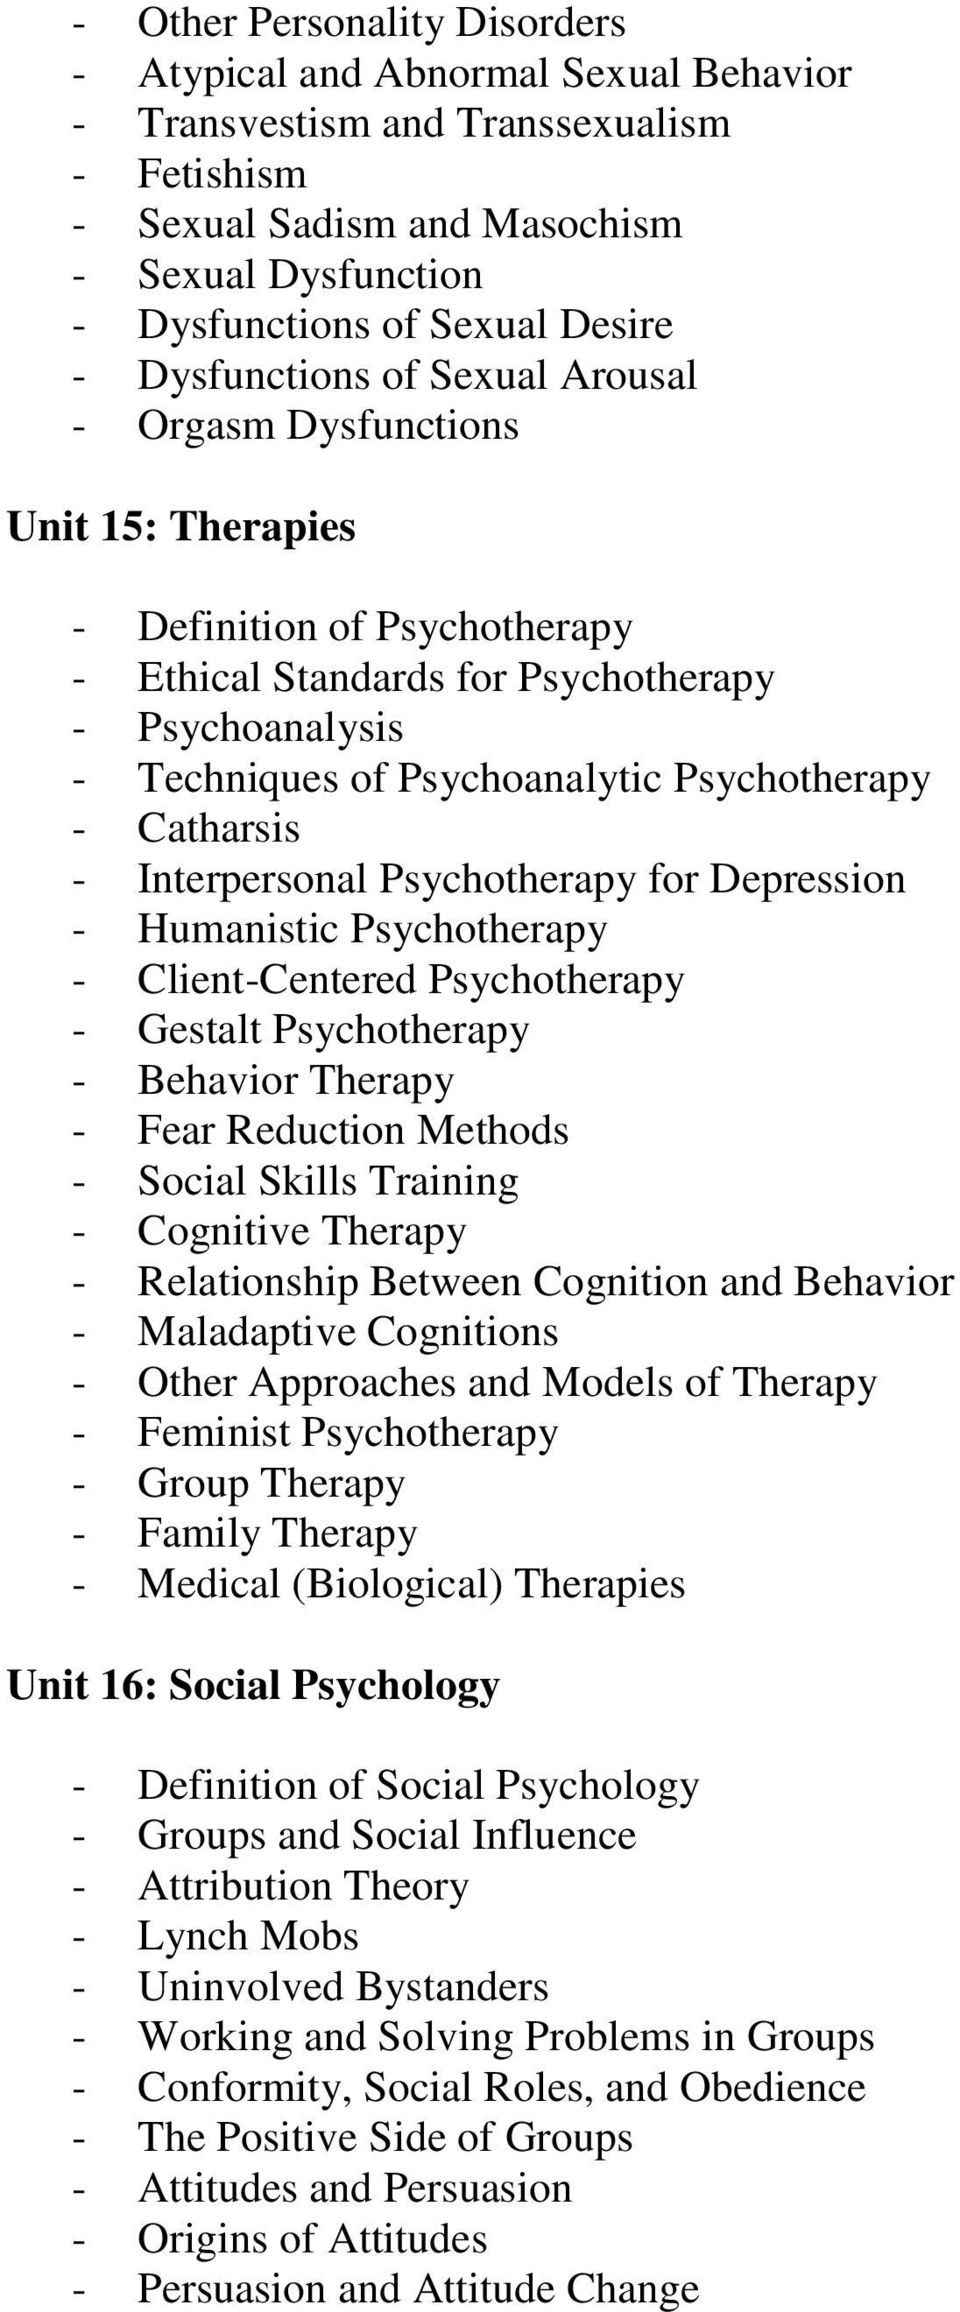 Psychotherapy - Catharsis - Interpersonal Psychotherapy for Depression - Humanistic Psychotherapy - Client-Centered Psychotherapy - Gestalt Psychotherapy - Behavior Therapy - Fear Reduction Methods -